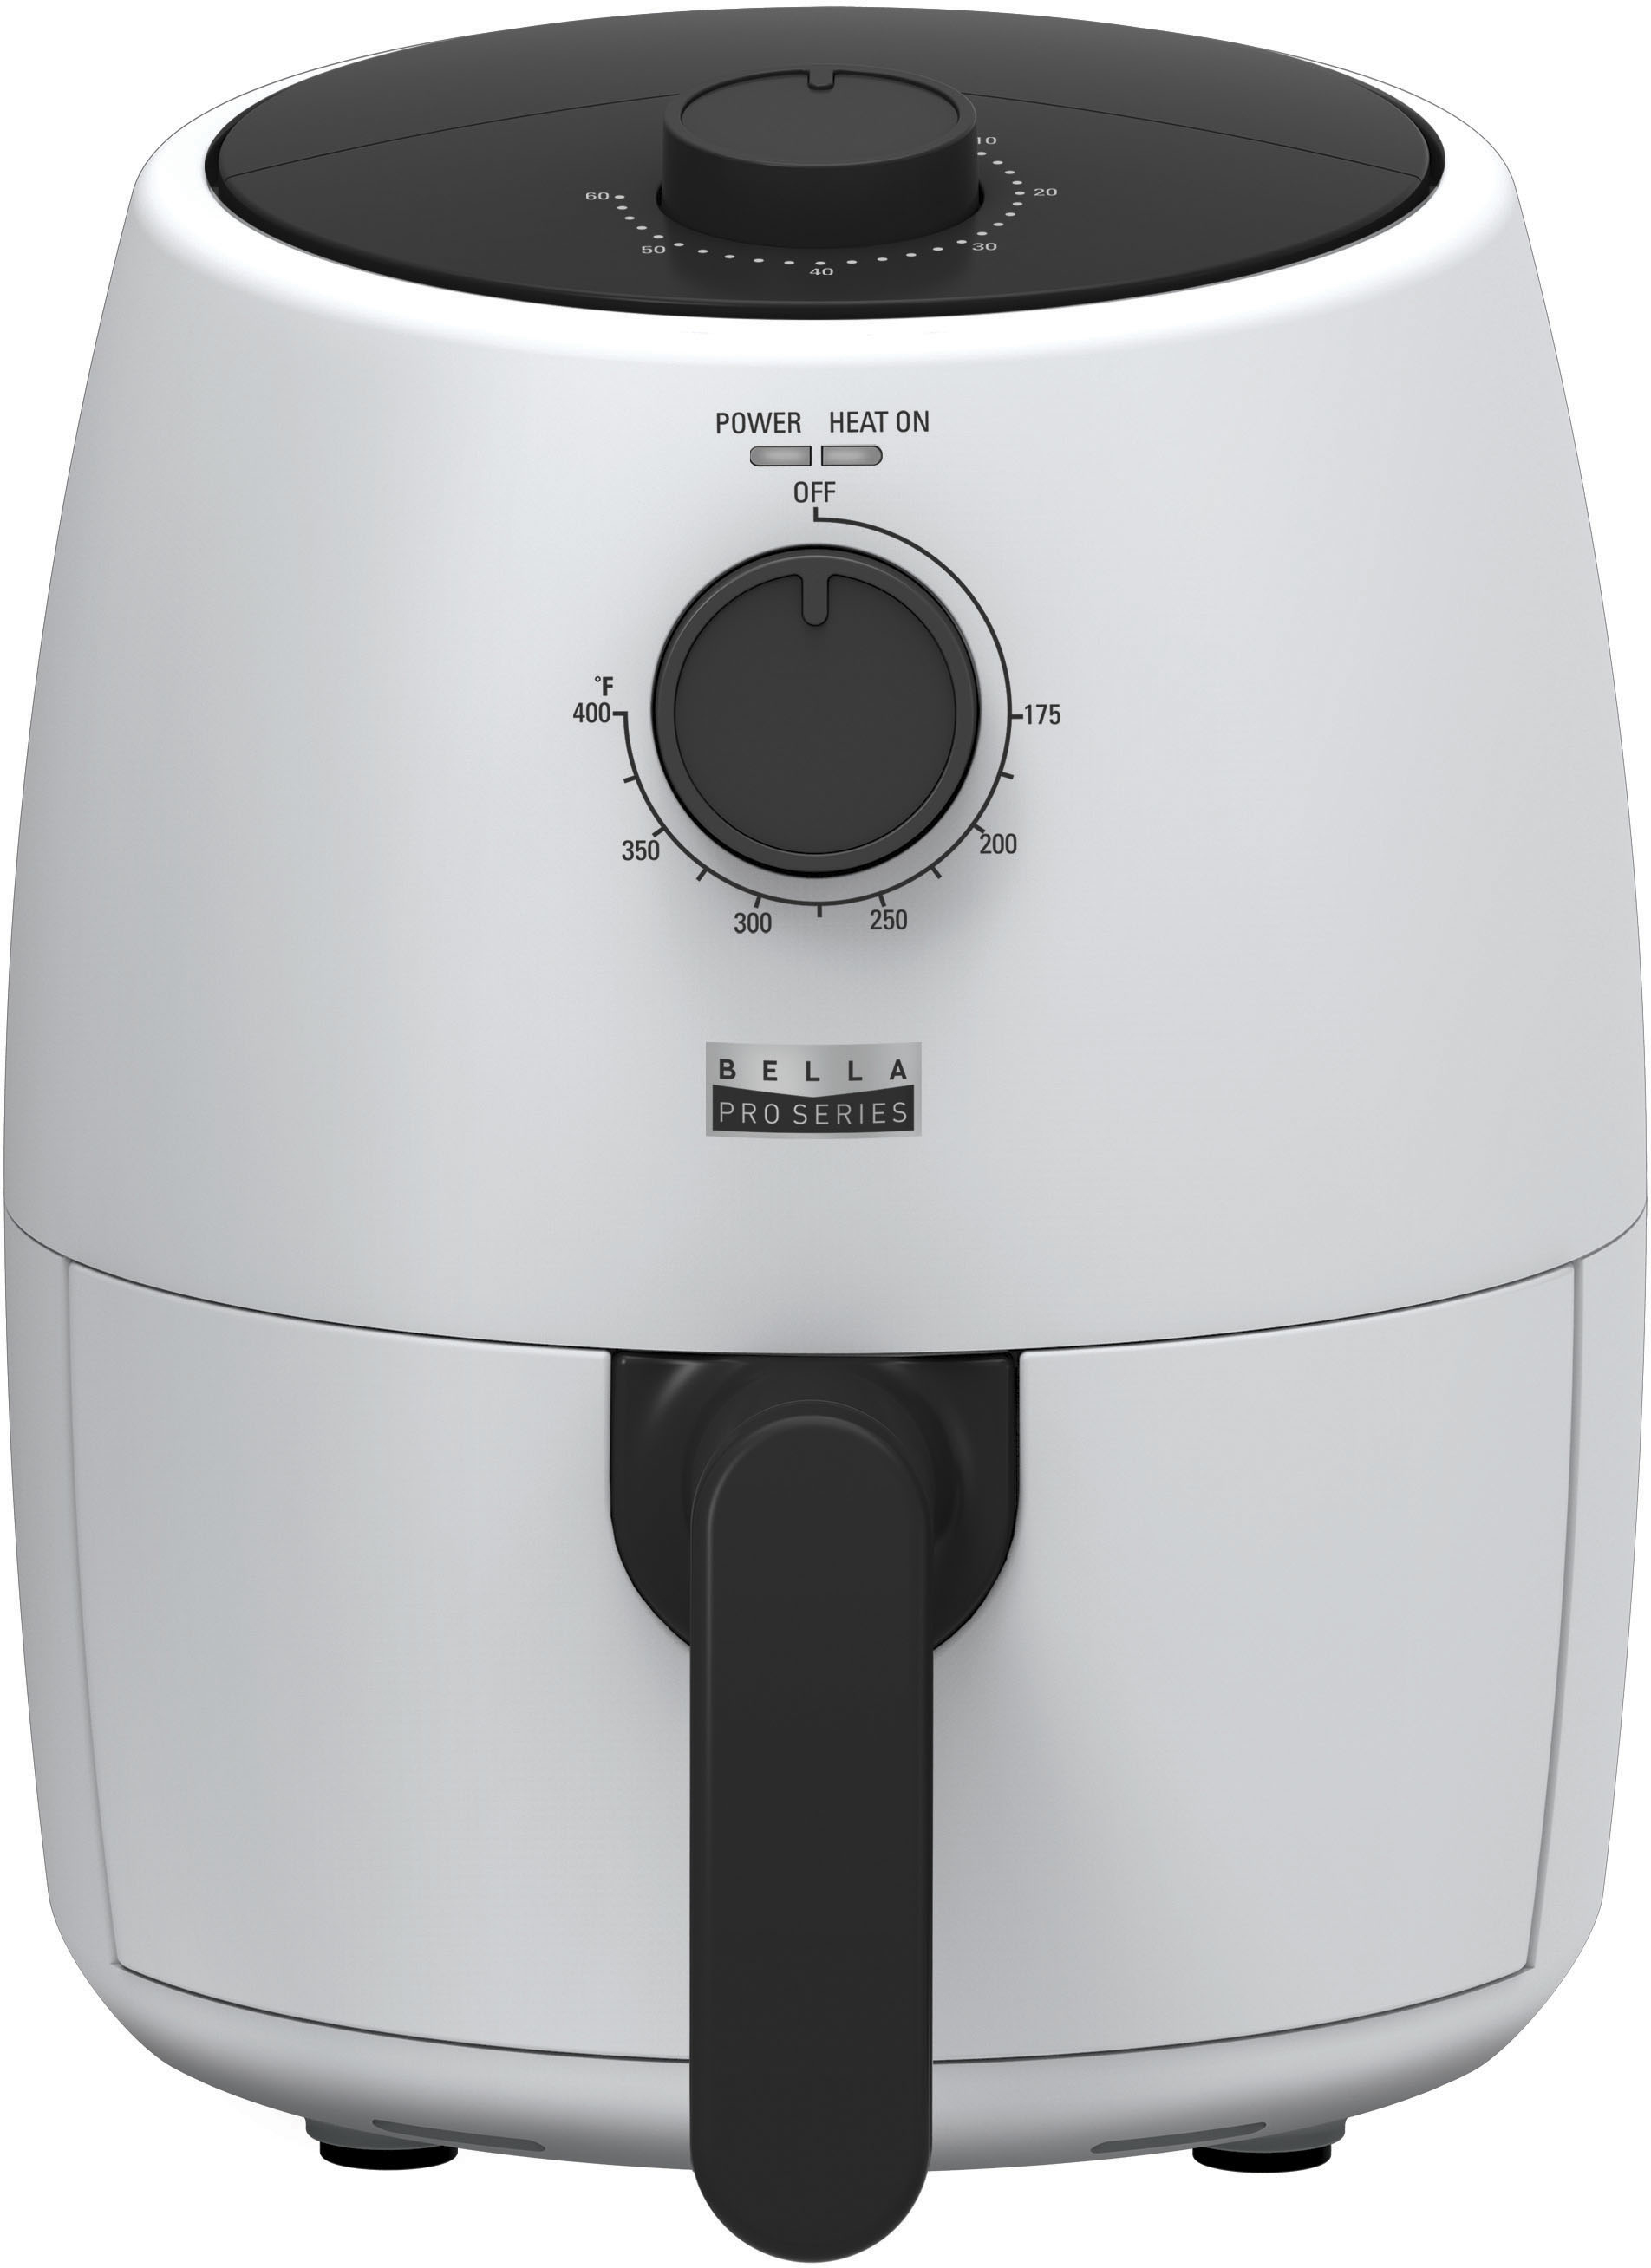 Angle View: Chefman - TurboFry XL 8 Quart Air Fryer, Digital Touchscreen w/ Presets & Shake Reminder - Stainless Steel